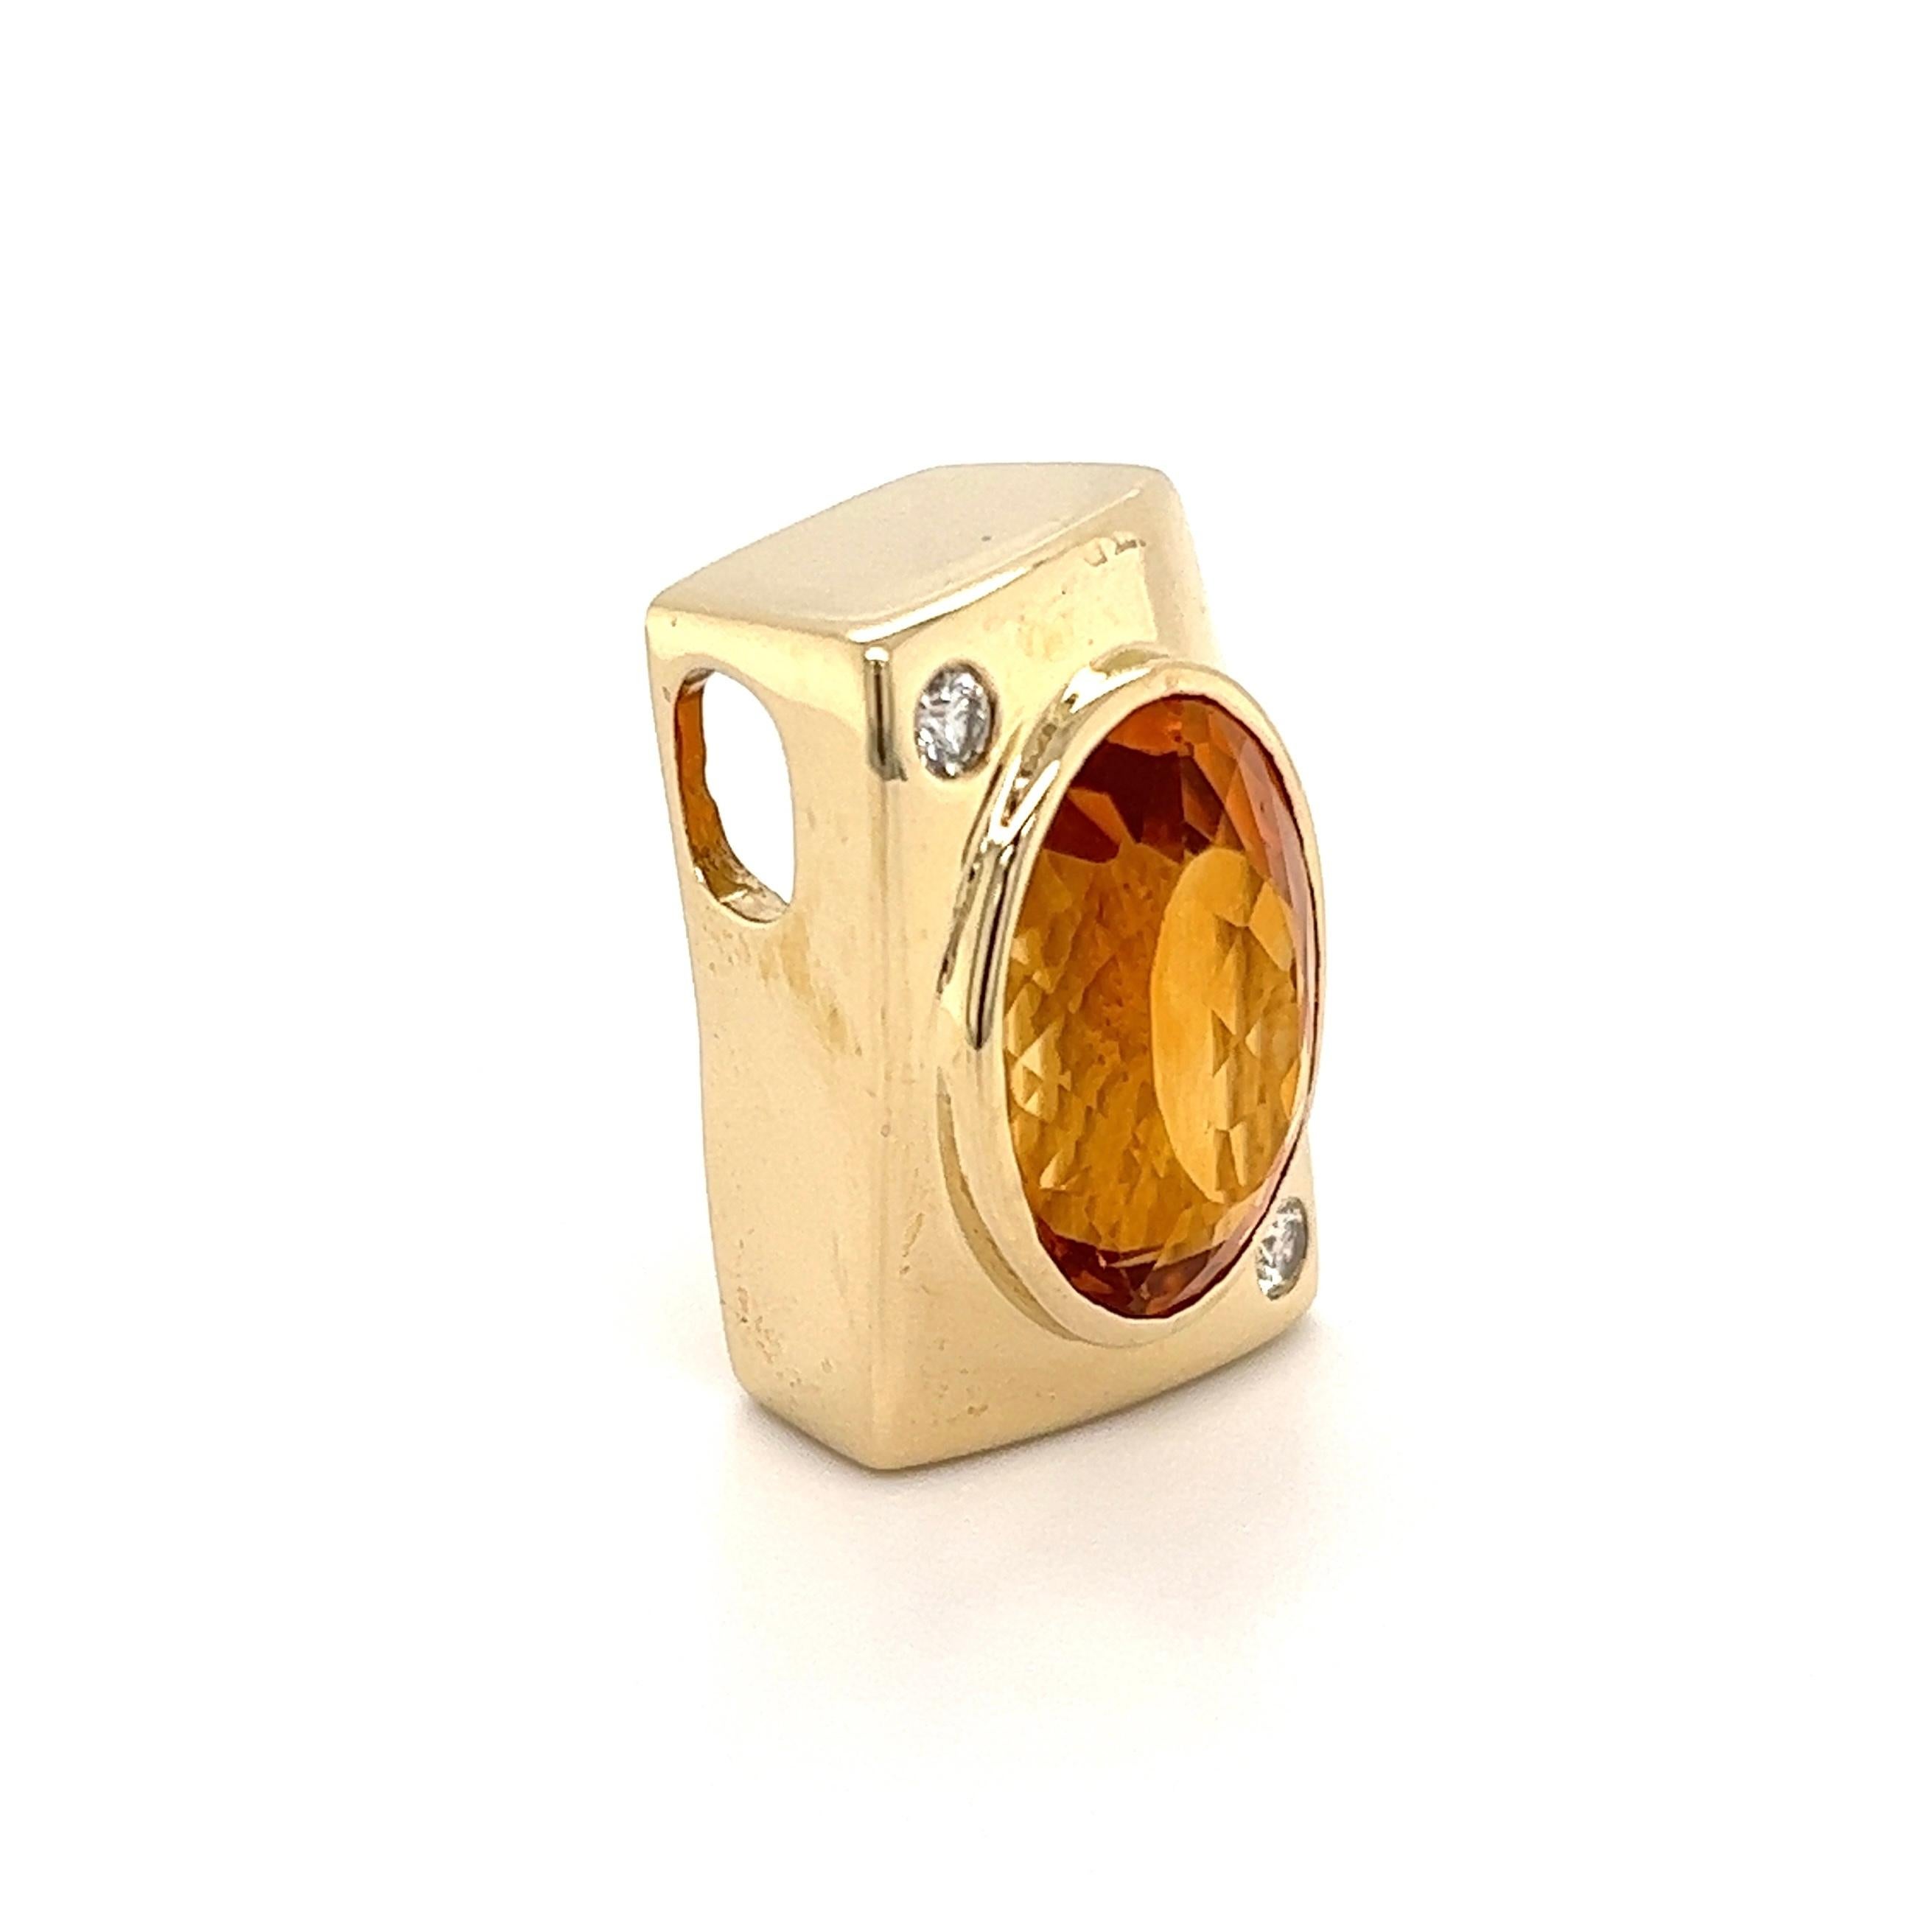 Simply Fabulous, Timeless and Finely detailed Citrine and Diamond Gold Slide Pendant. Centering a securely nestled 12Carat Citrine, accented by Diamonds weighing approx. 0.15tcw. Hand crafted 14K Yellow Gold mounting. Approx. dimensions: 1.00” l x